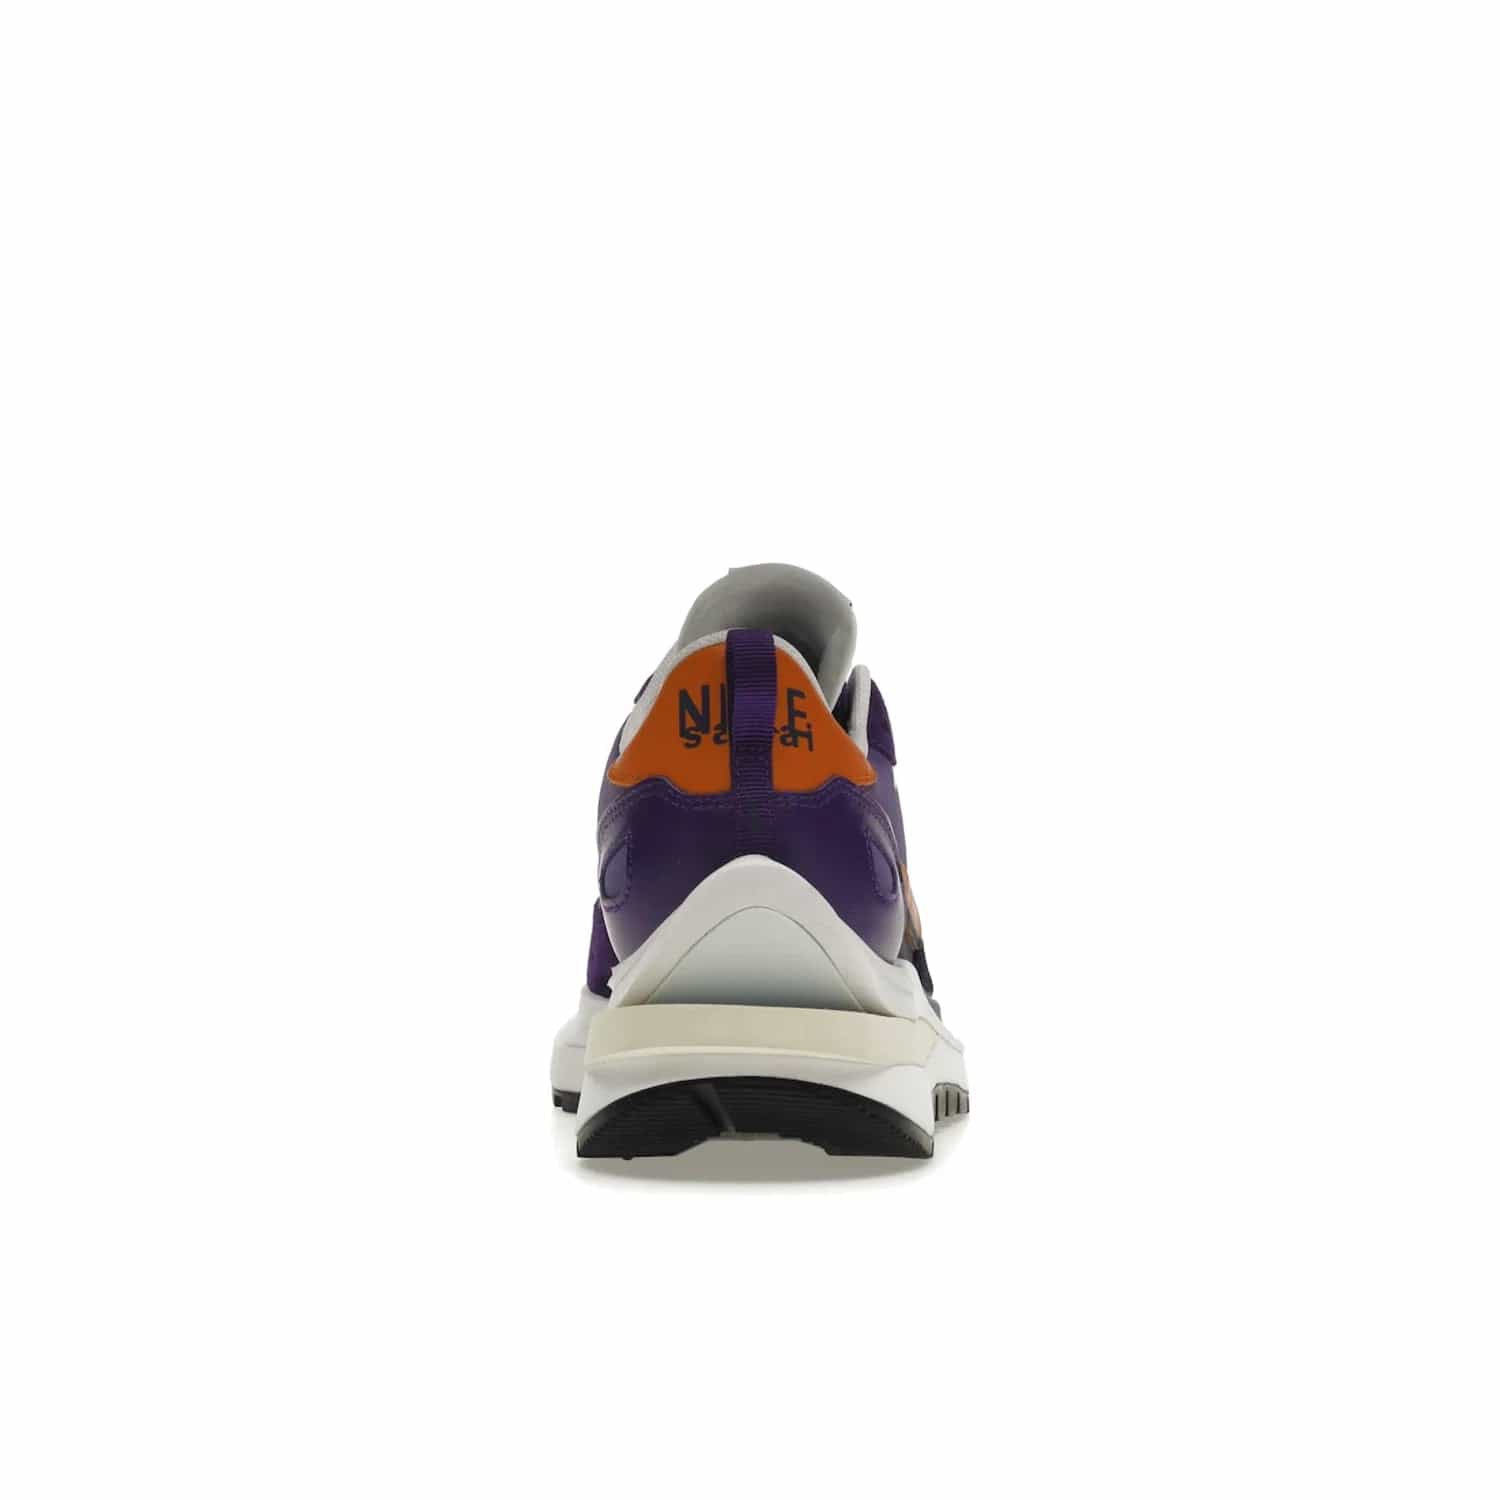 Nike Vaporwaffle sacai Dark Iris - Image 28 - Only at www.BallersClubKickz.com - Unique Nike Vaporwaffle sacai Dark Iris collab. Suede, leather & textile upper with Orange accents. Dual tongues & midsoles. Woven labels & heel tabs branding. Colorway of Purple, Orange, White & Black. Must-have for any wardrobe.